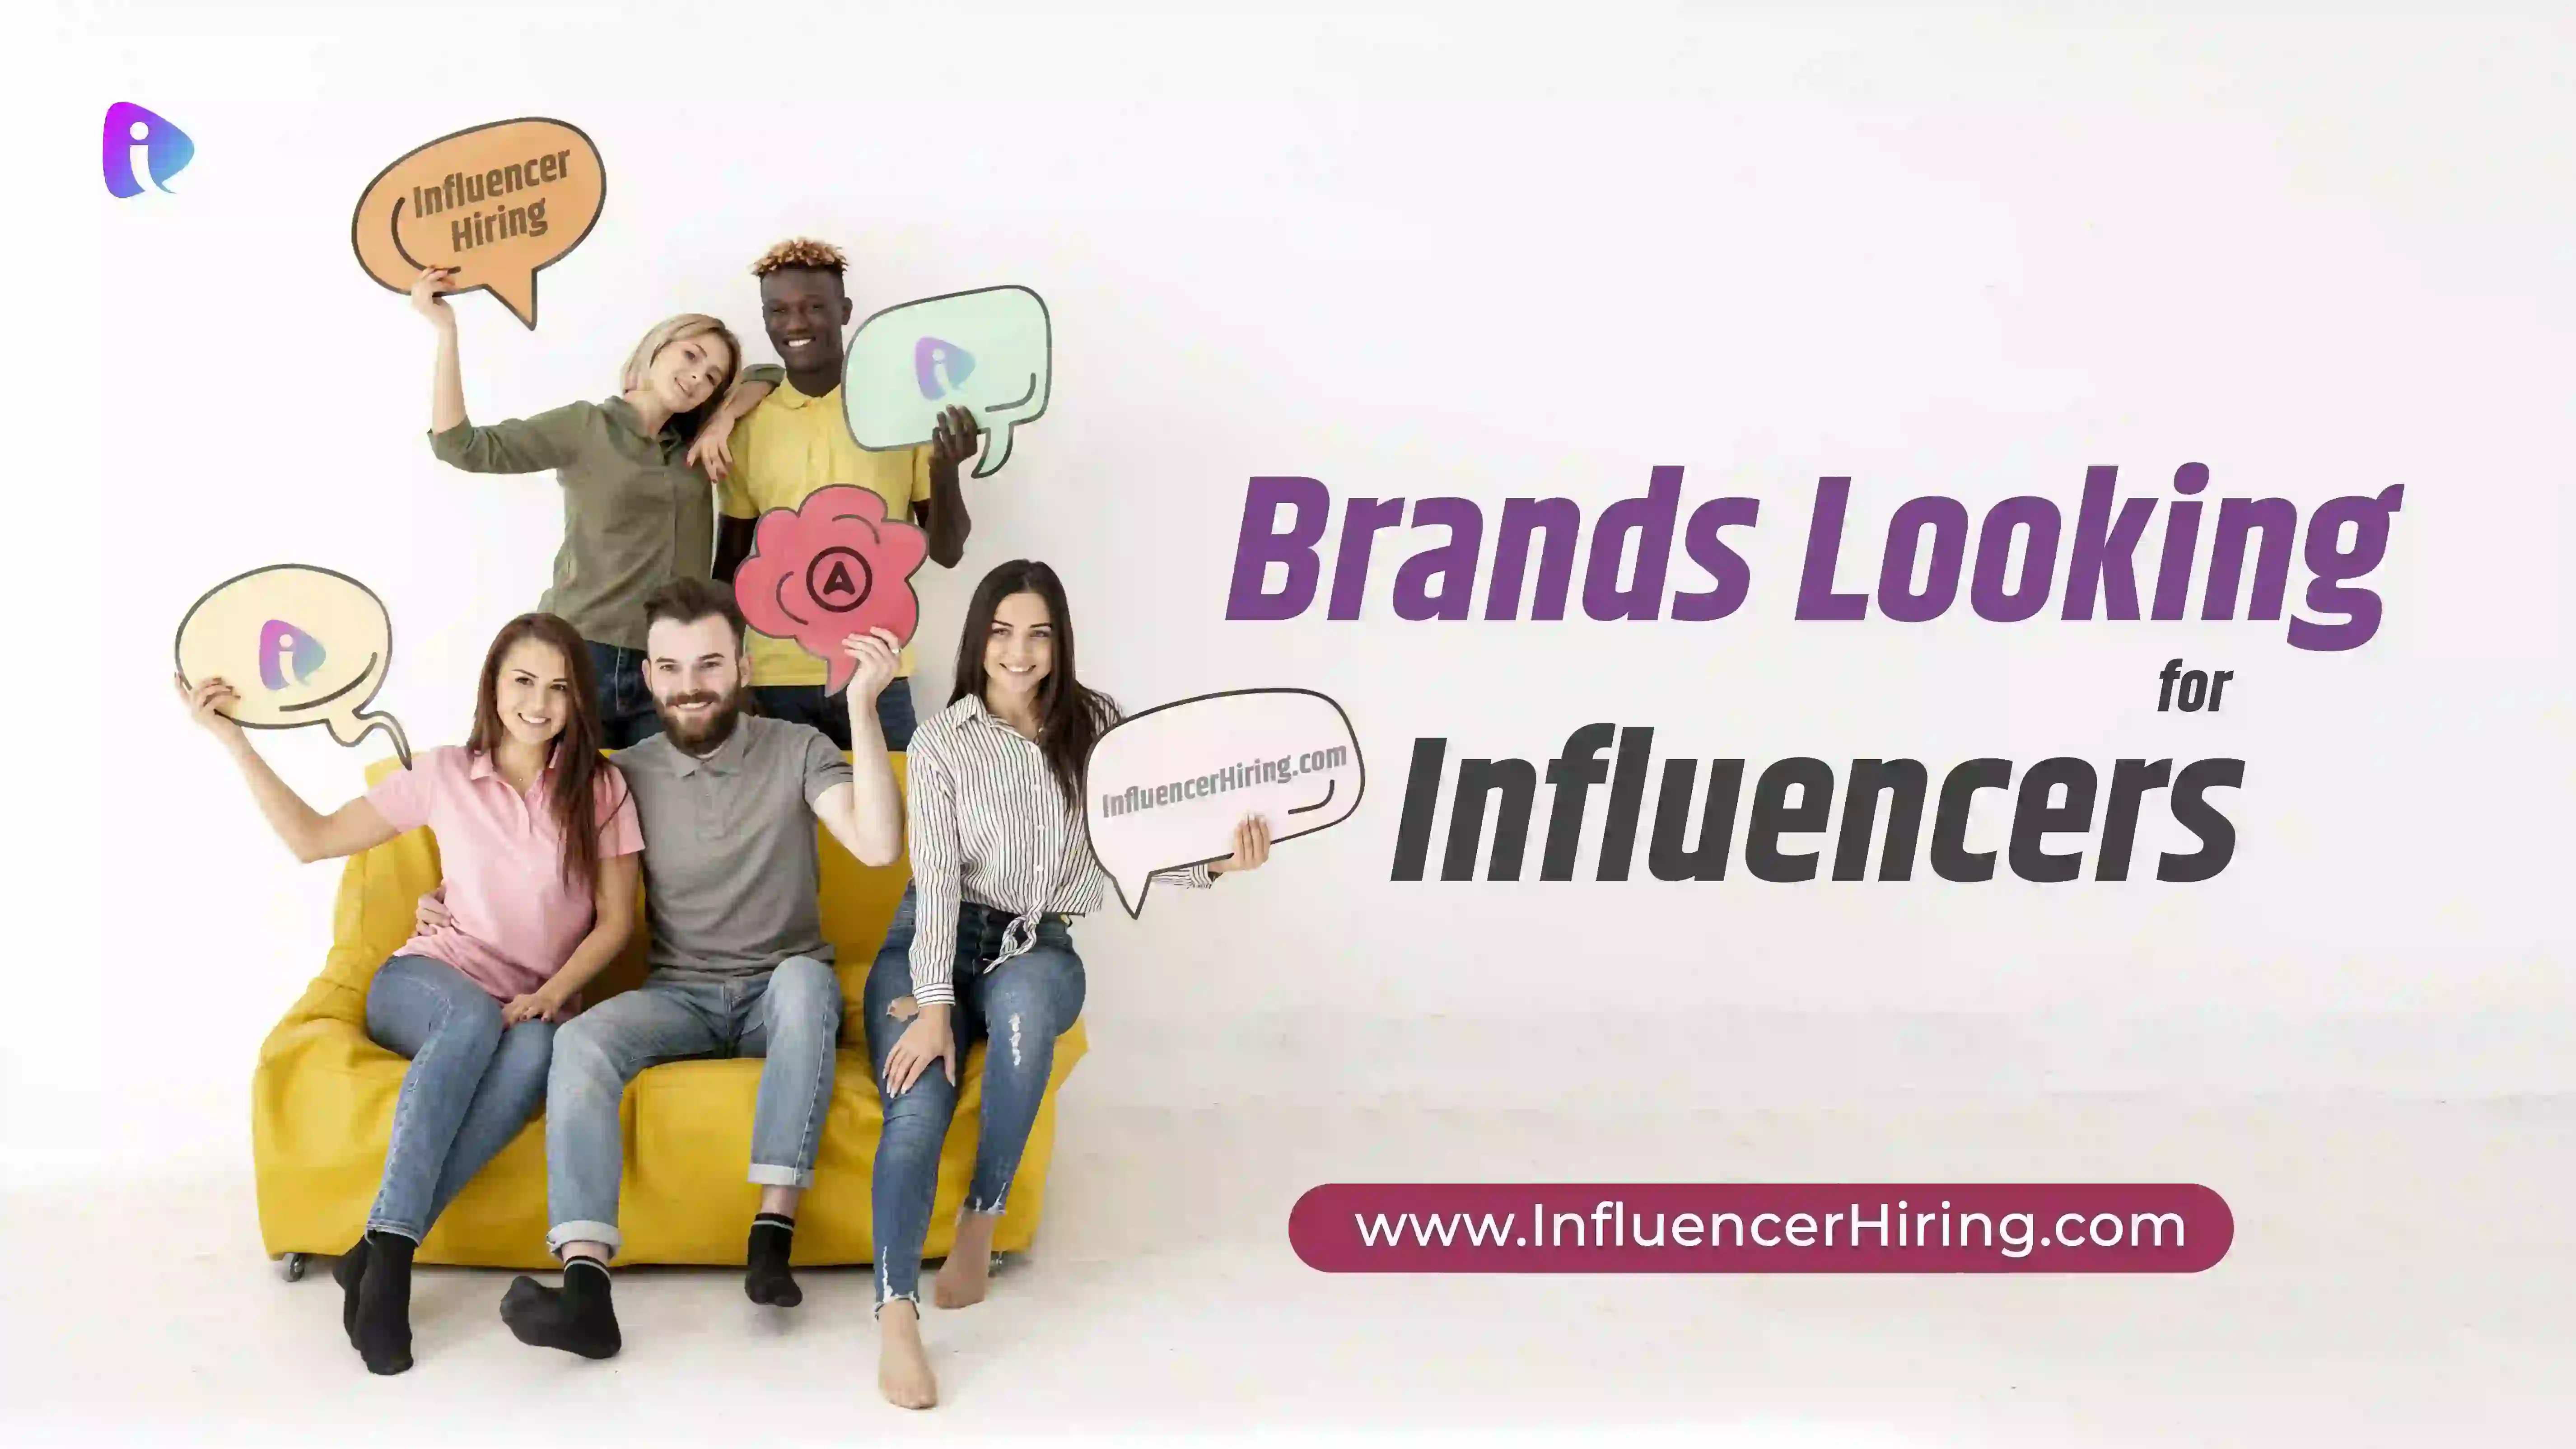 Five individuals discussing the various kinds of influencers brands are looking